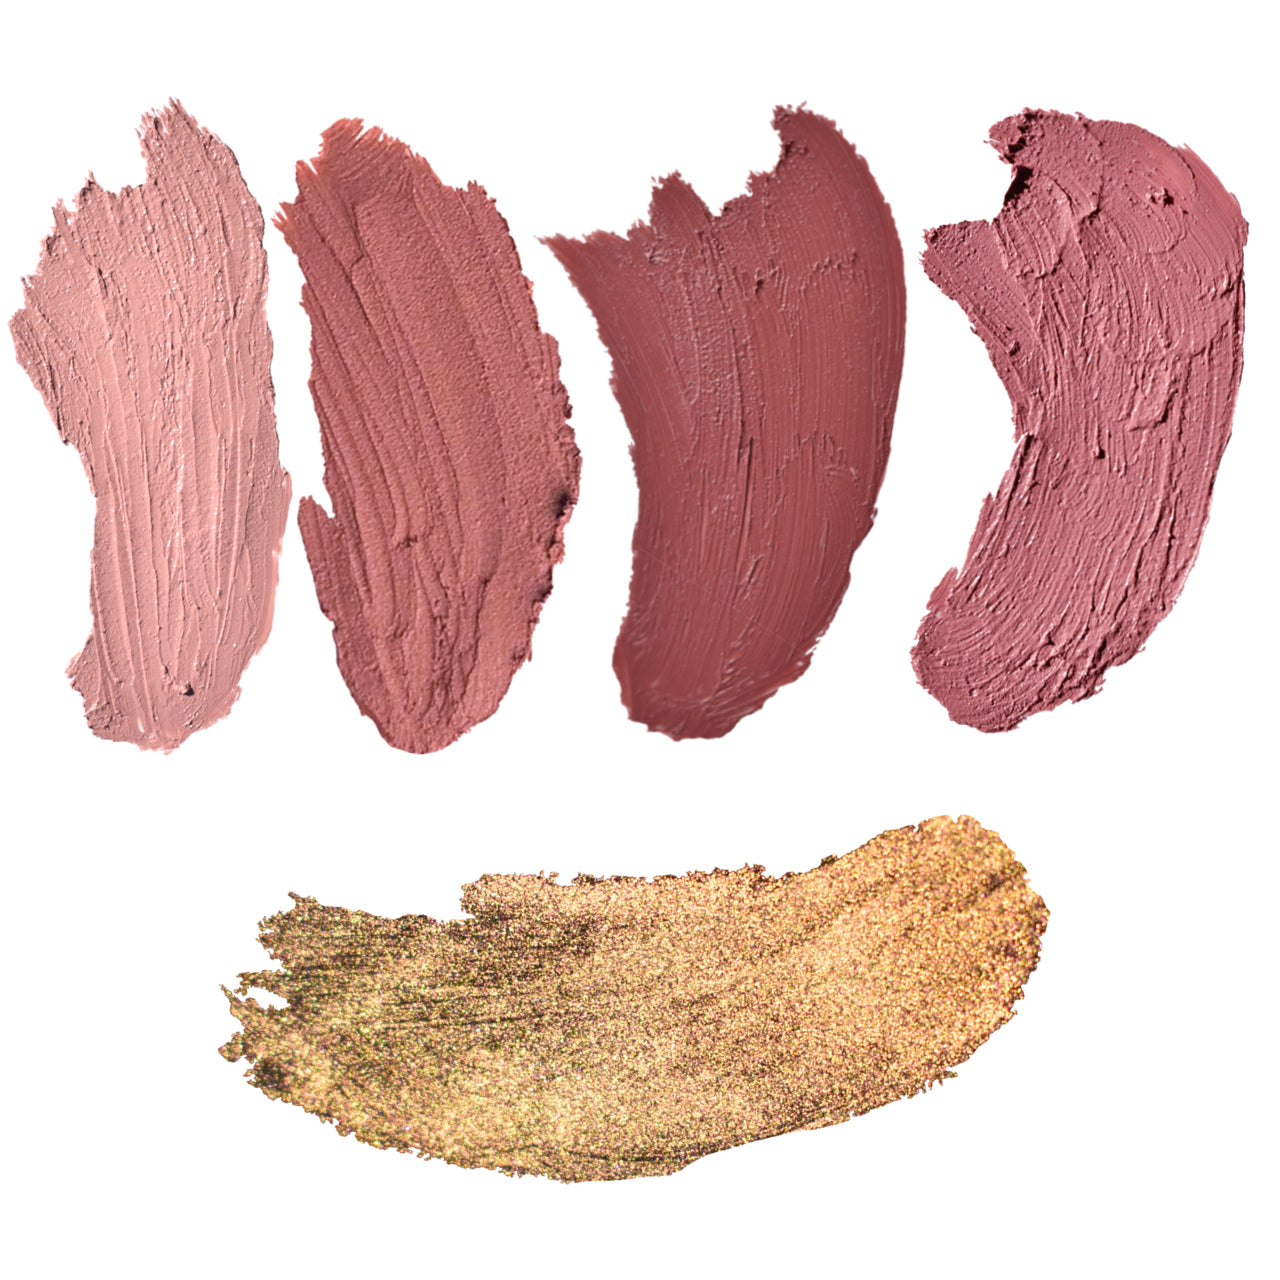 NEARLY NUDE LIPSTICK PACK